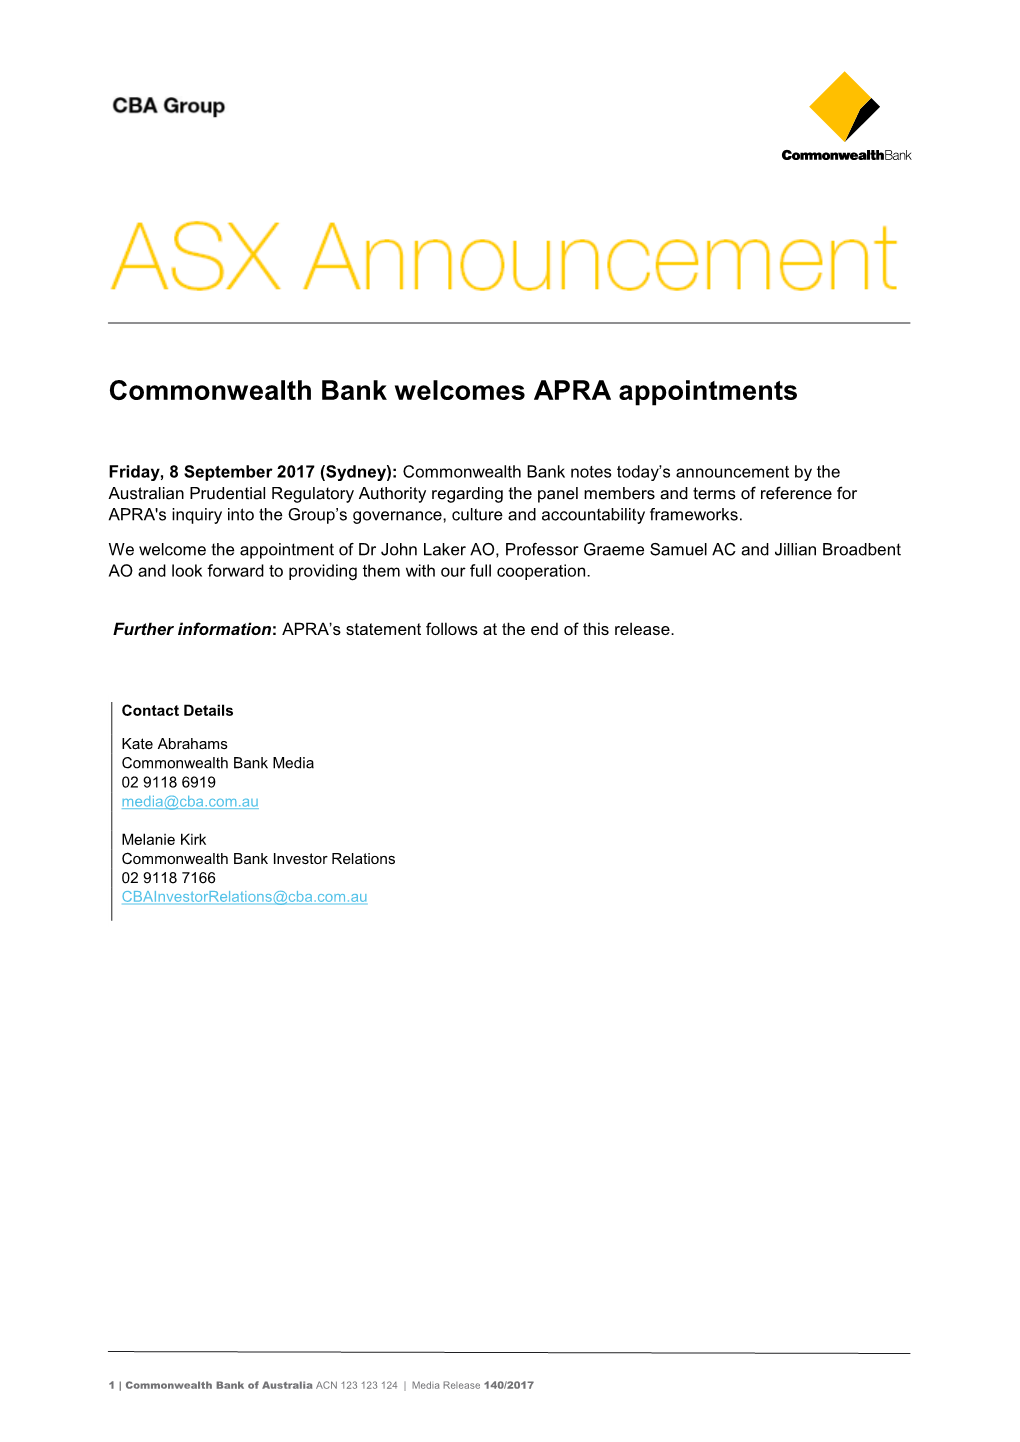 Commonwealth Bank Welcomes APRA Appointments